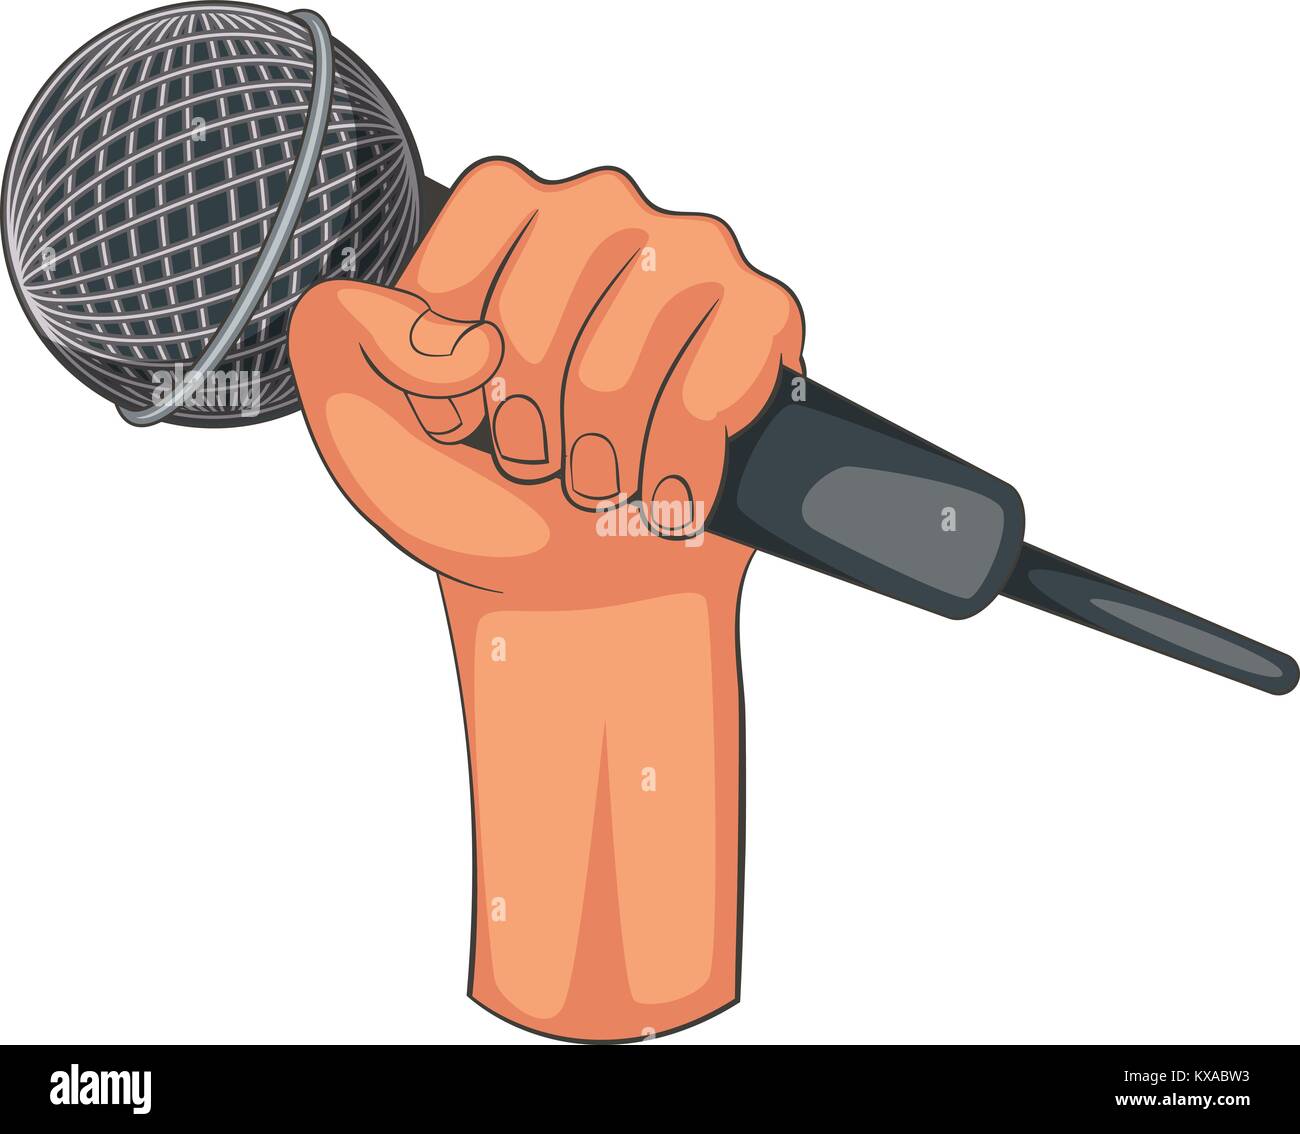 Free Vectors  Hand holding a hand microphone (interviewer)